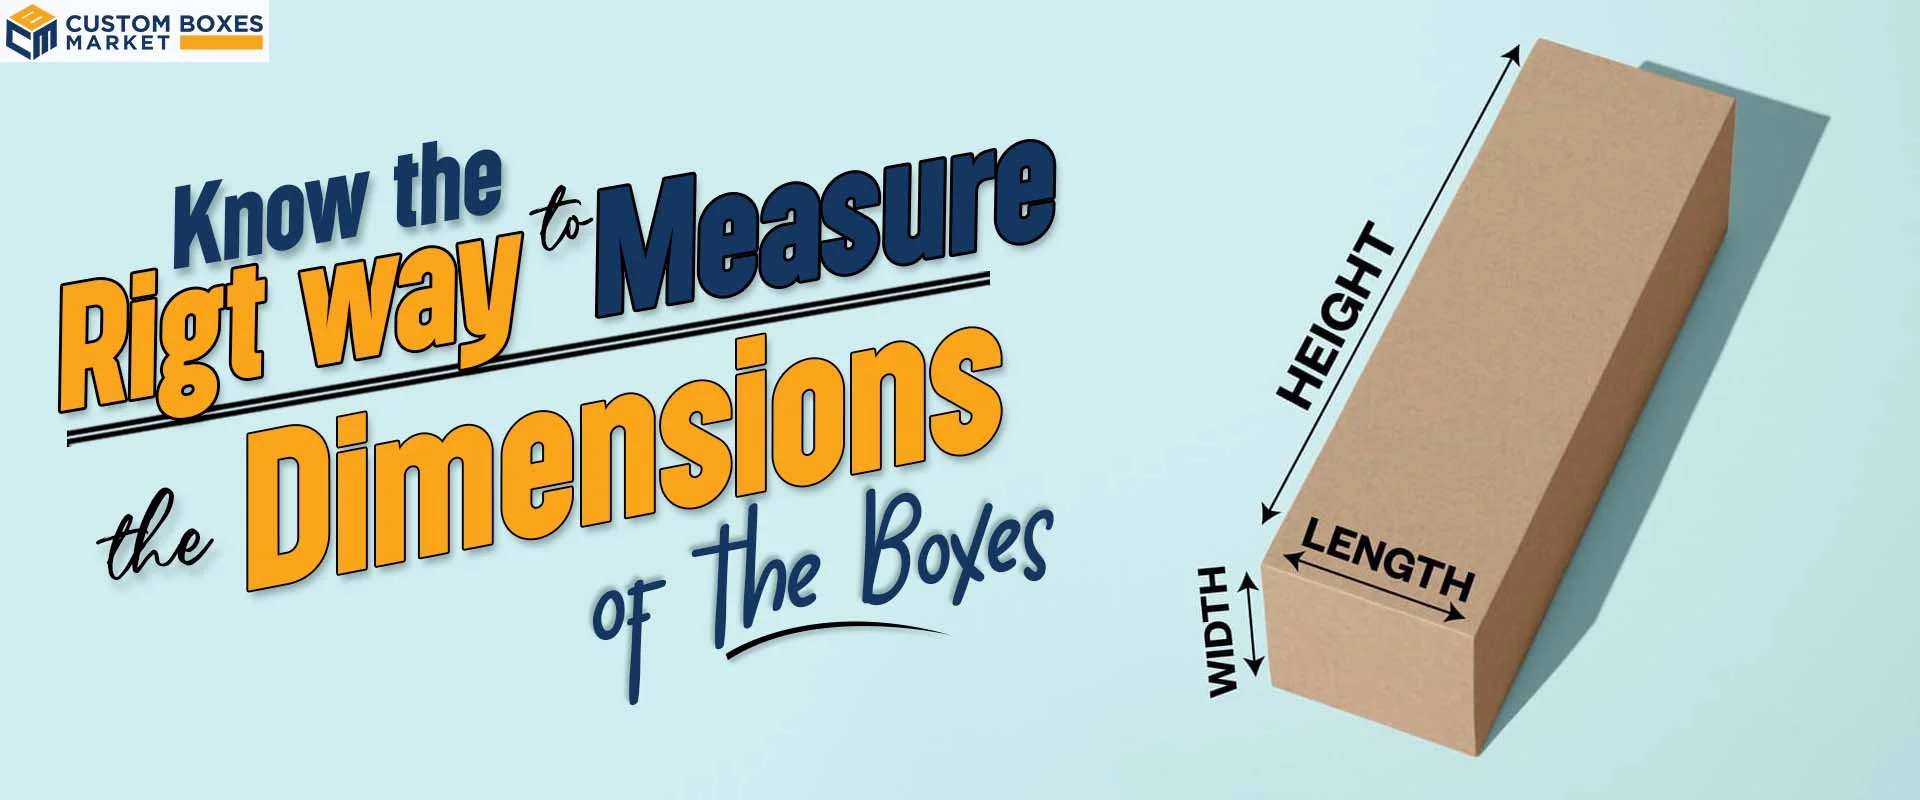 Know The Right Way To Measure The Dimensions Of The Boxes